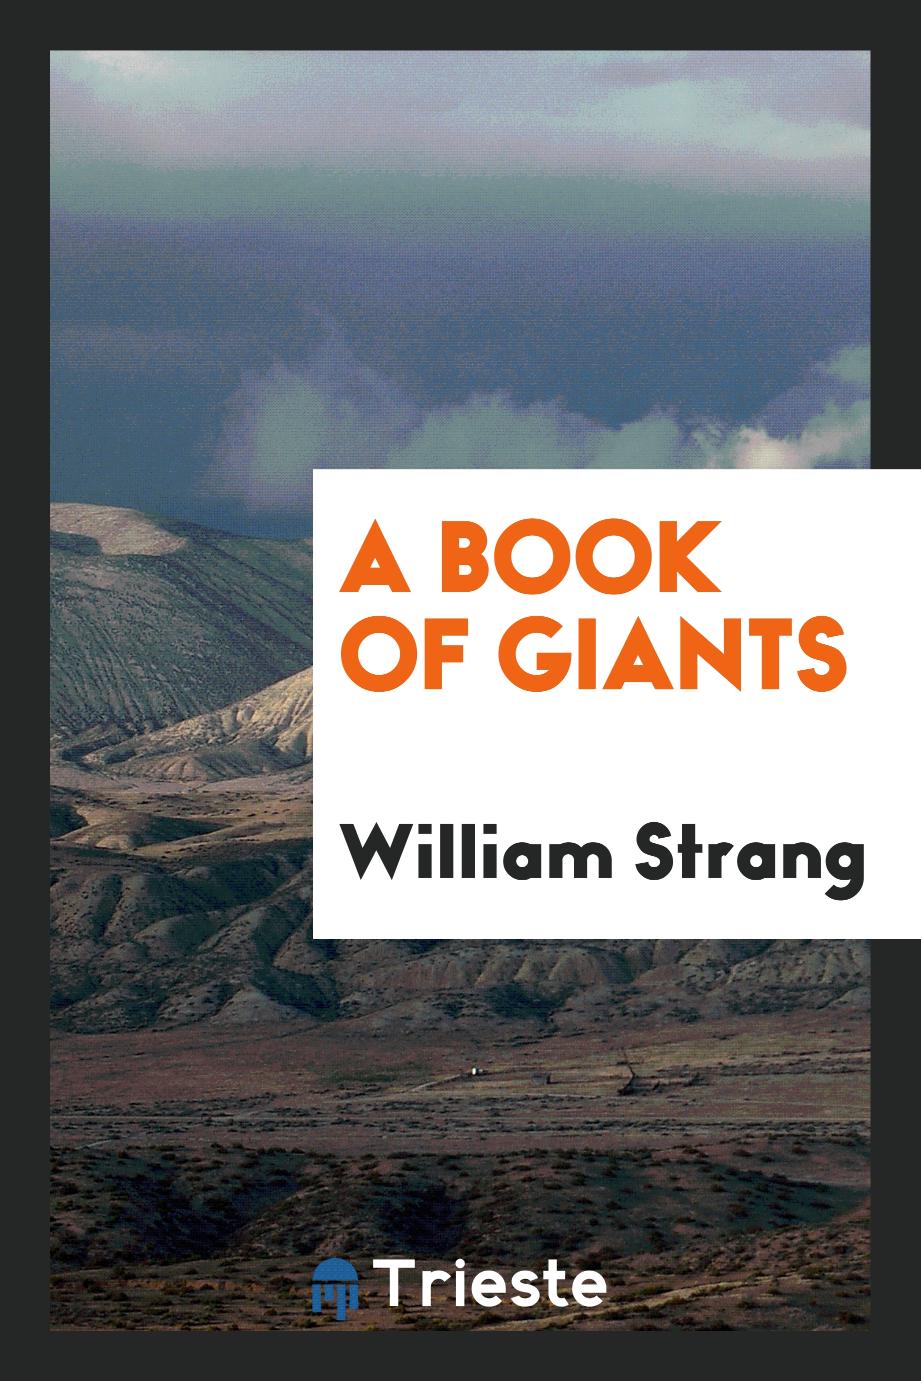 A book of giants